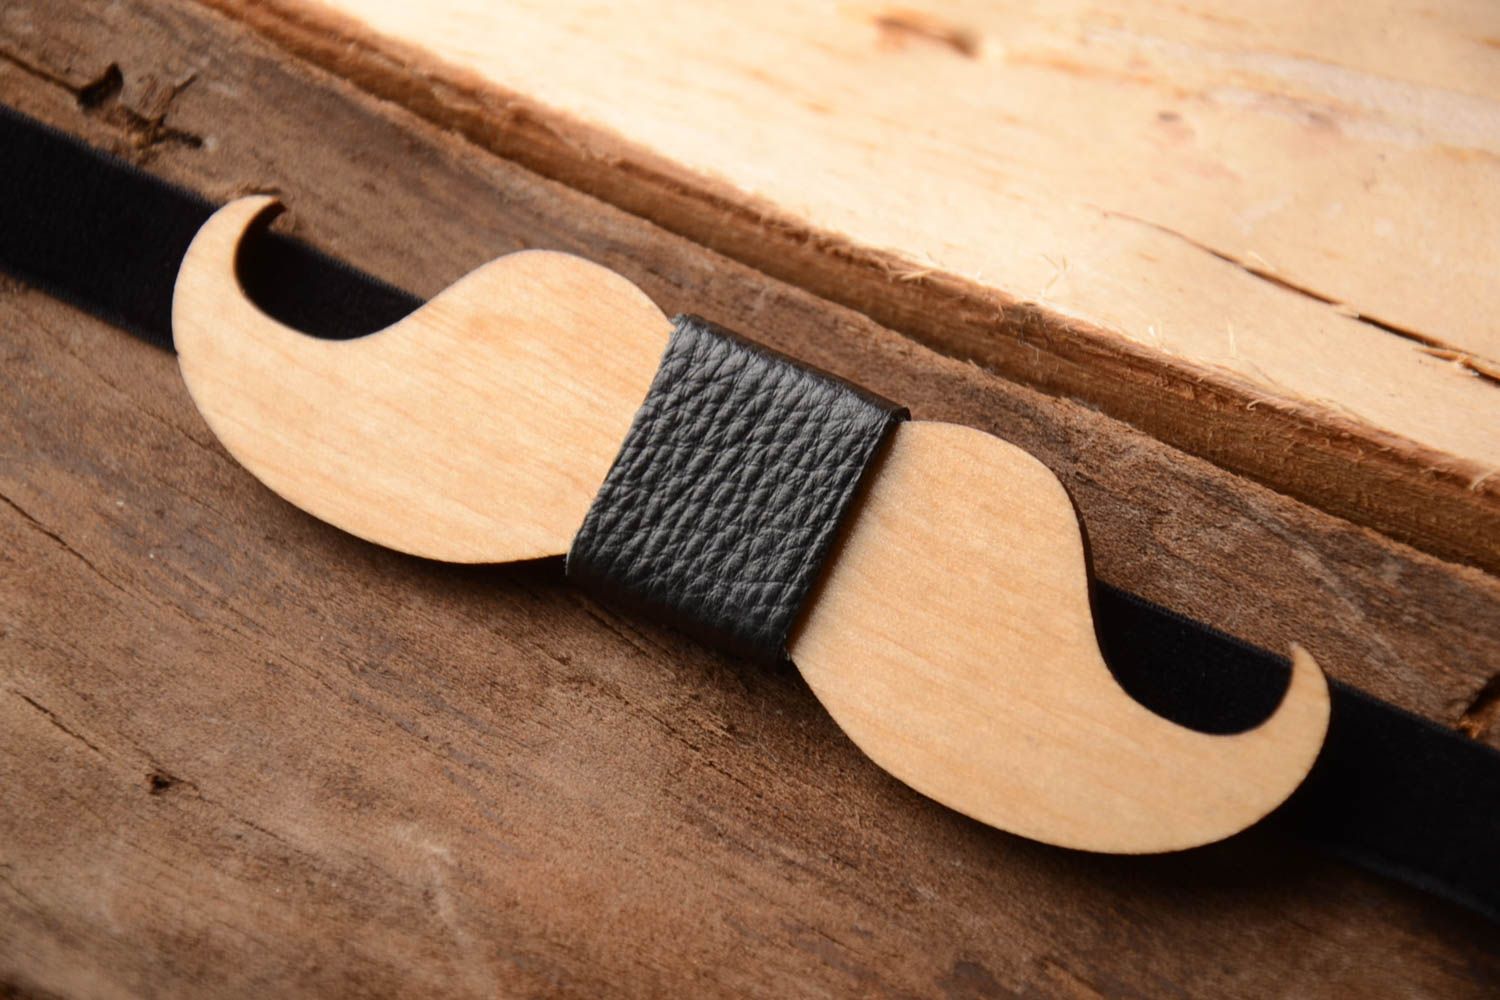 Handcrafted bow tie wooden bow tie accessories for men gift ideas for boyfriend photo 1